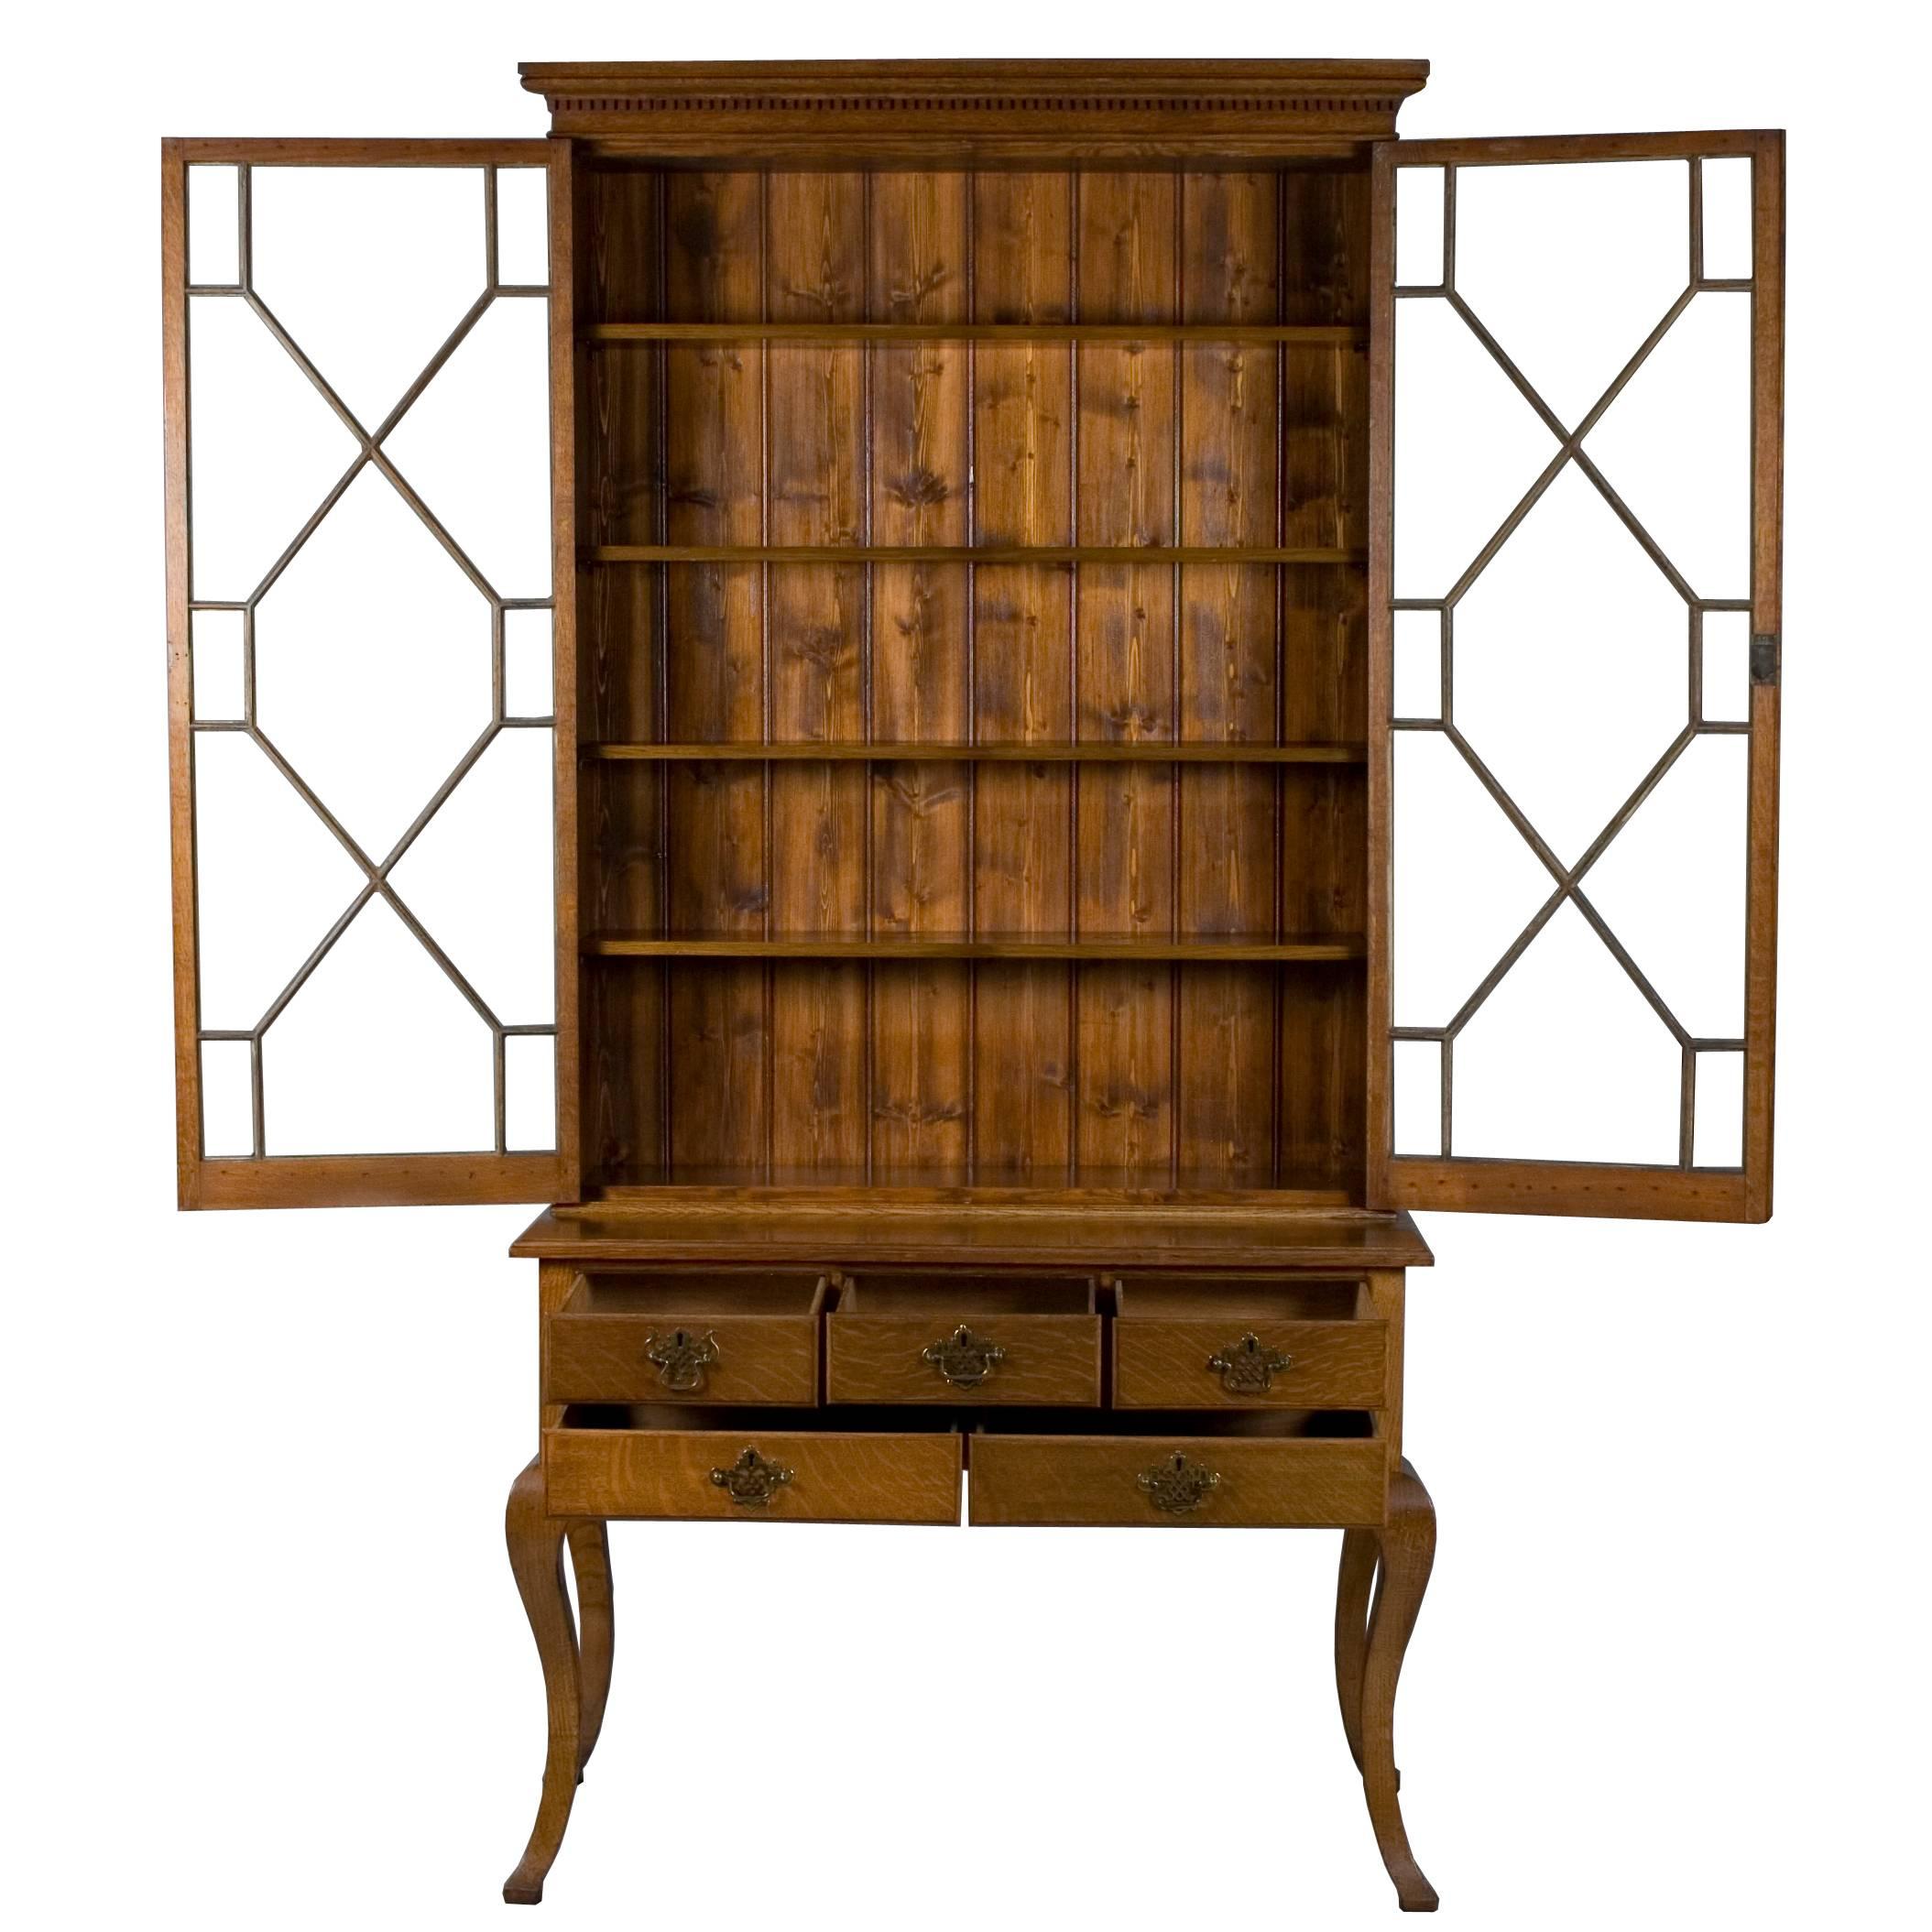 This stunning tall glass door bookcase is an English antique made circa 1890 out of oakwood. Two astragal glazed glass doors cover four adjustable wood shelves and rest upon a tall base with five drawers. The doors and drawers all lock and two keys